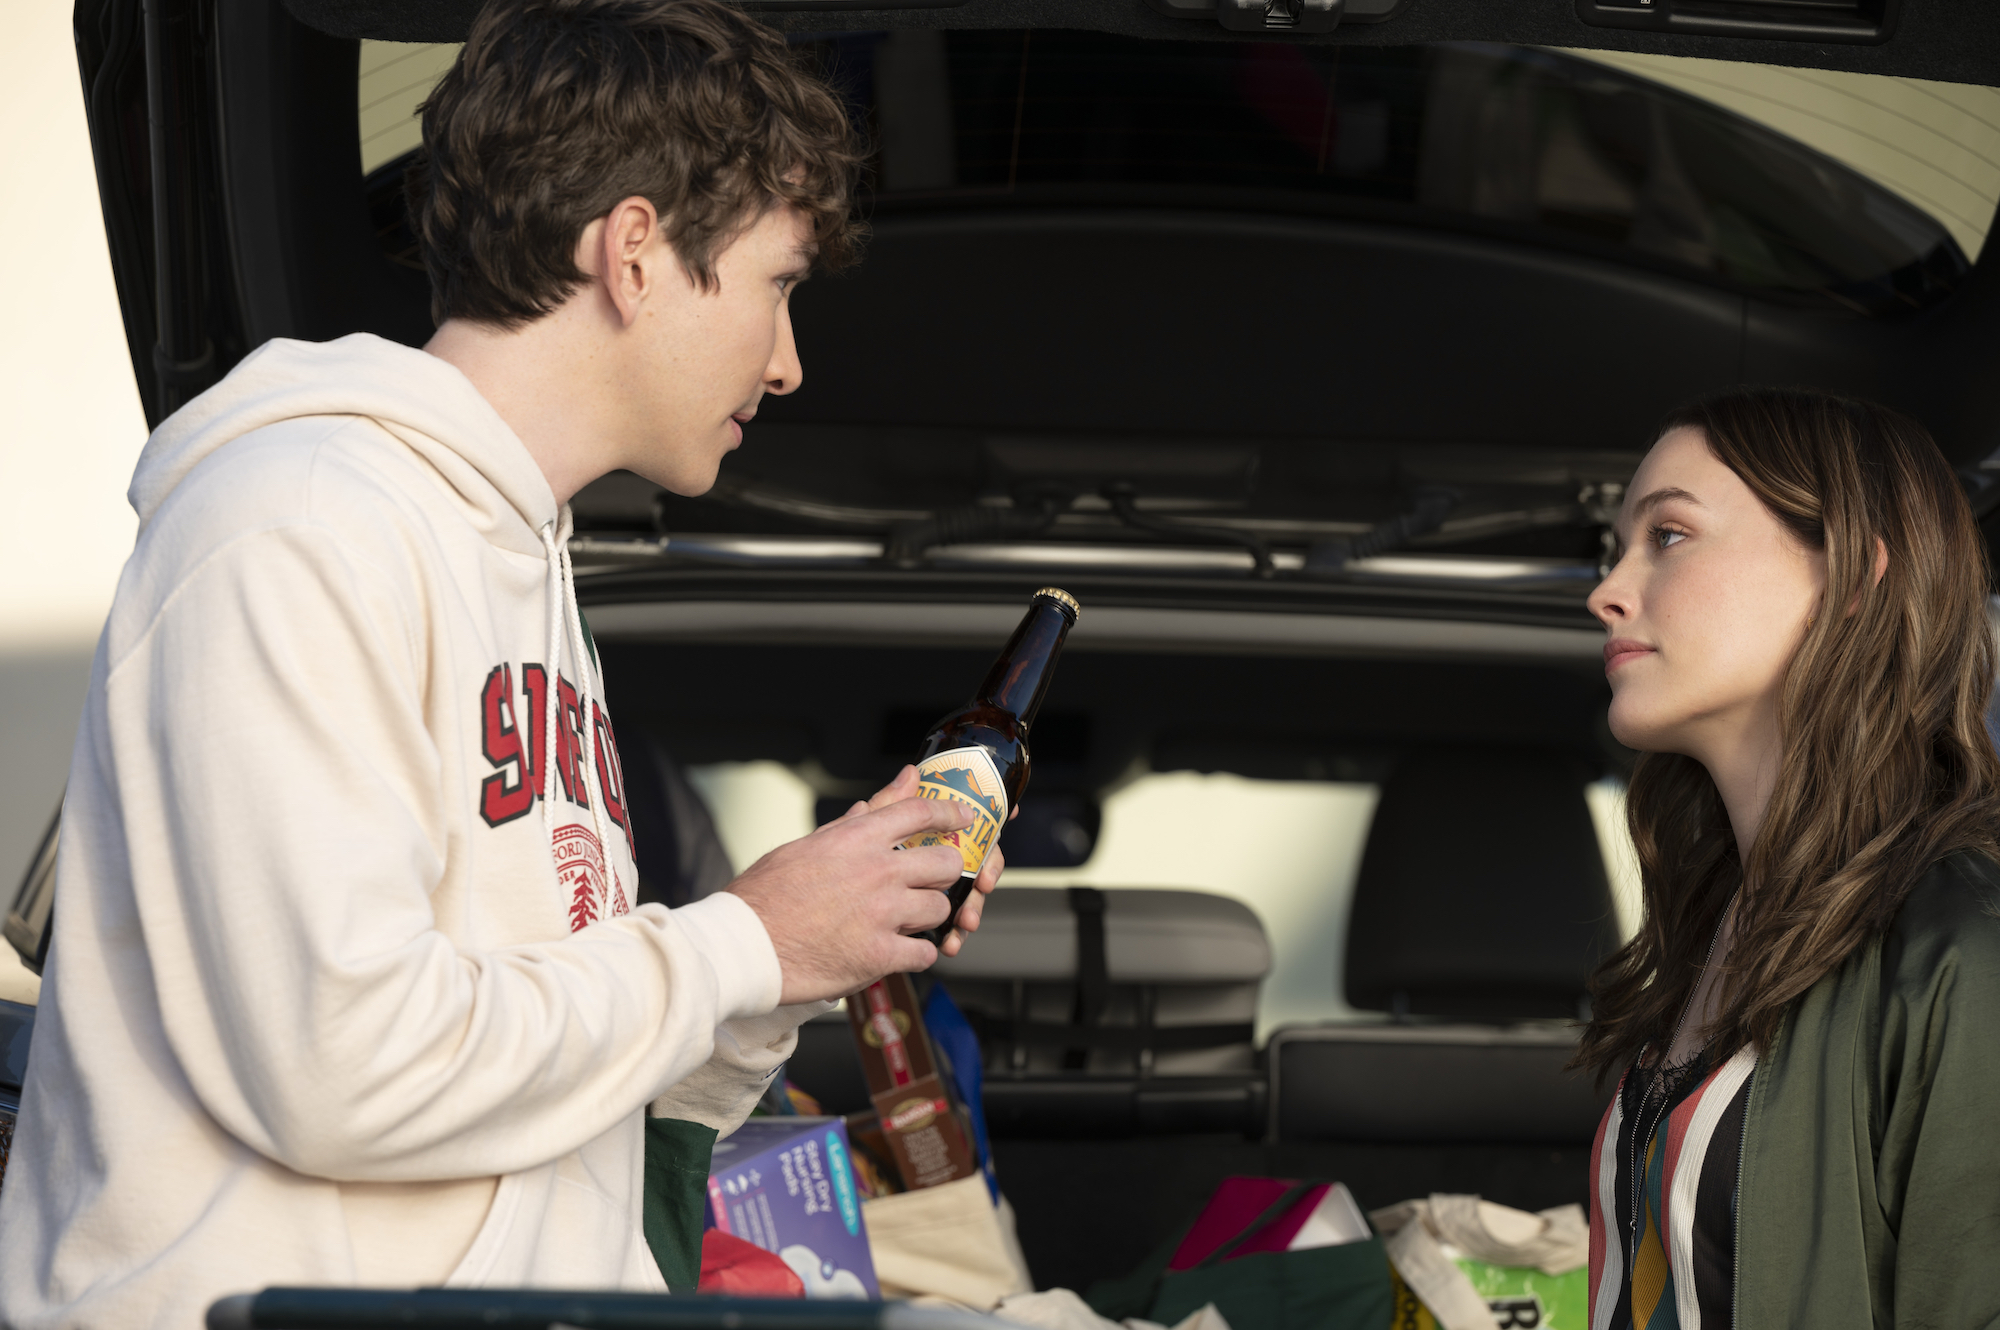 Dylan Arnold, and Victoria Pedretti talking near a car trunk in 'You' Season 3.